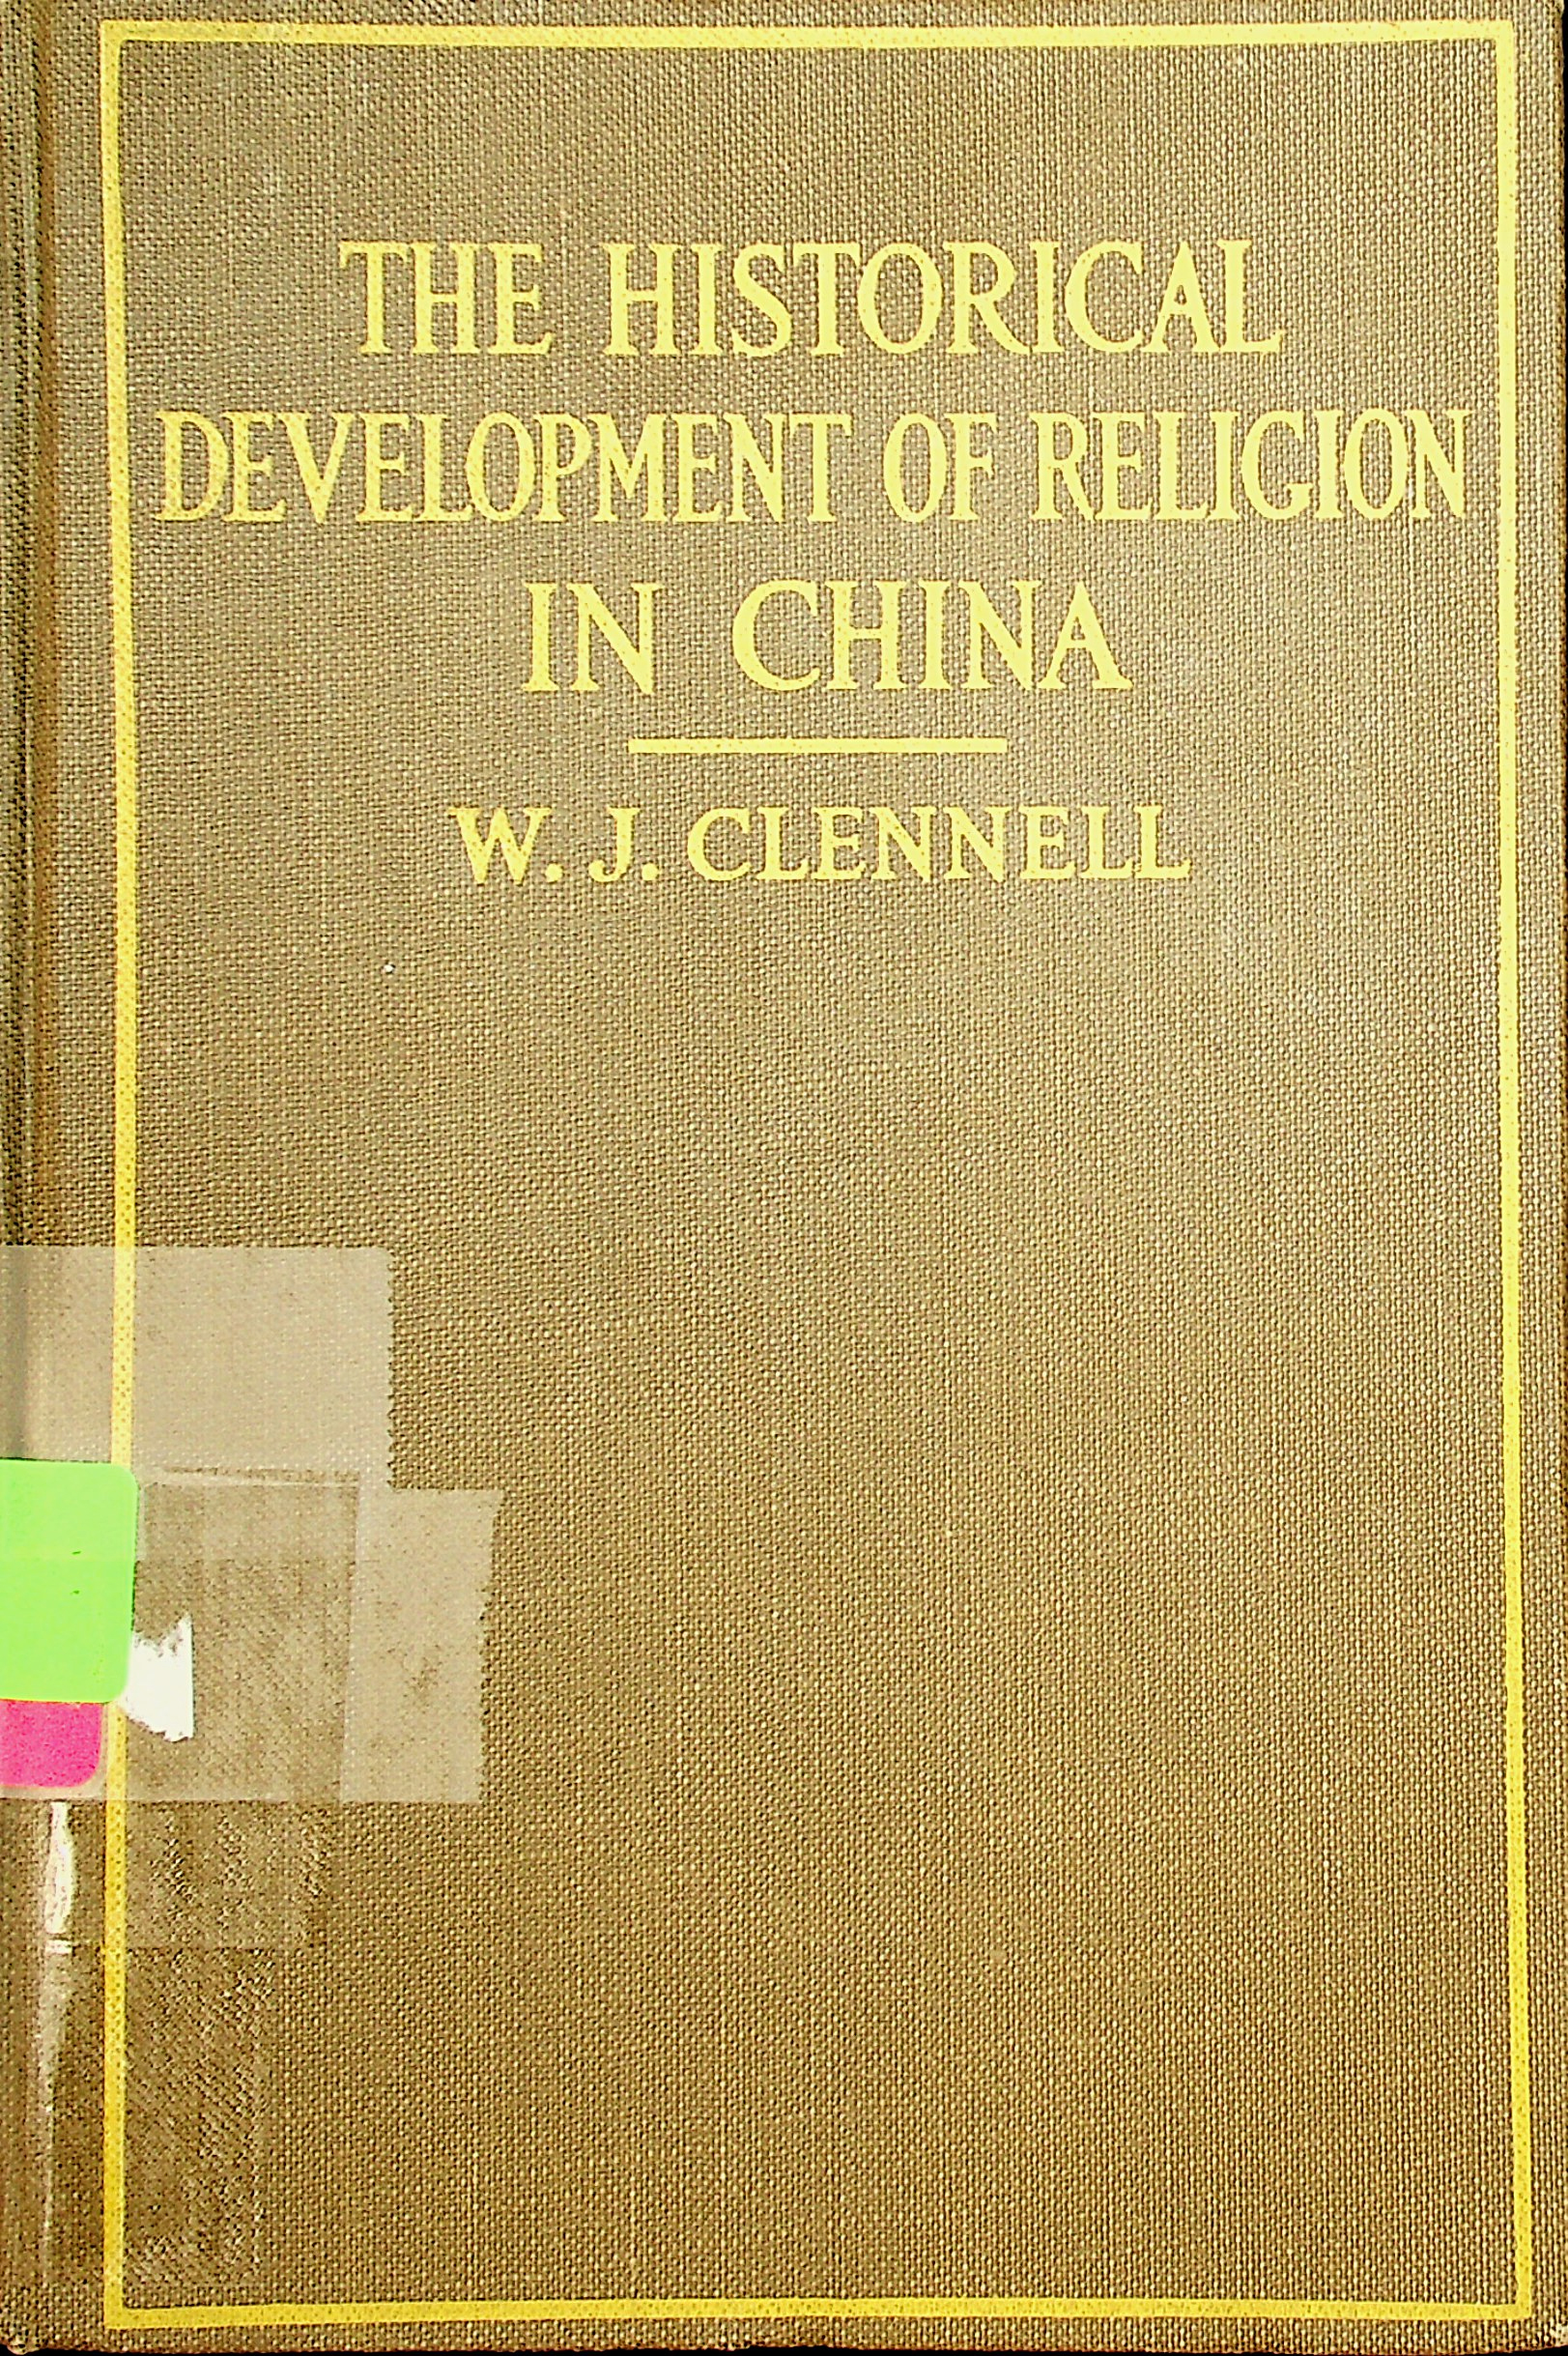 The historical development of religion in China 